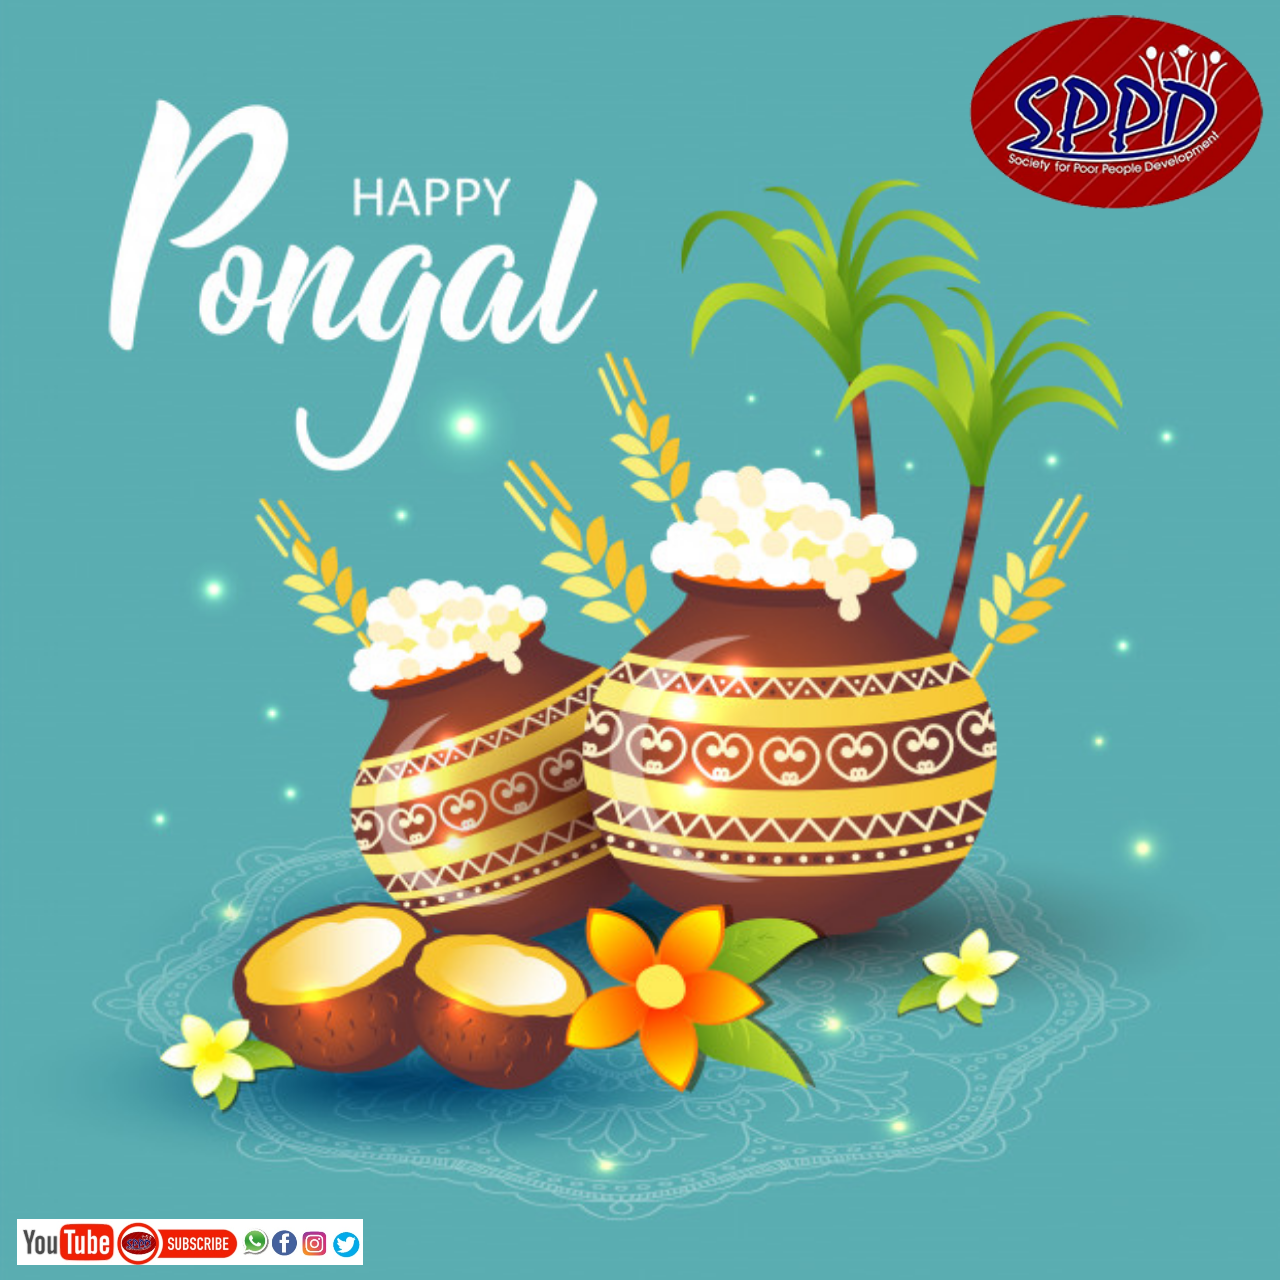 Wish you all a Happy Pongal!